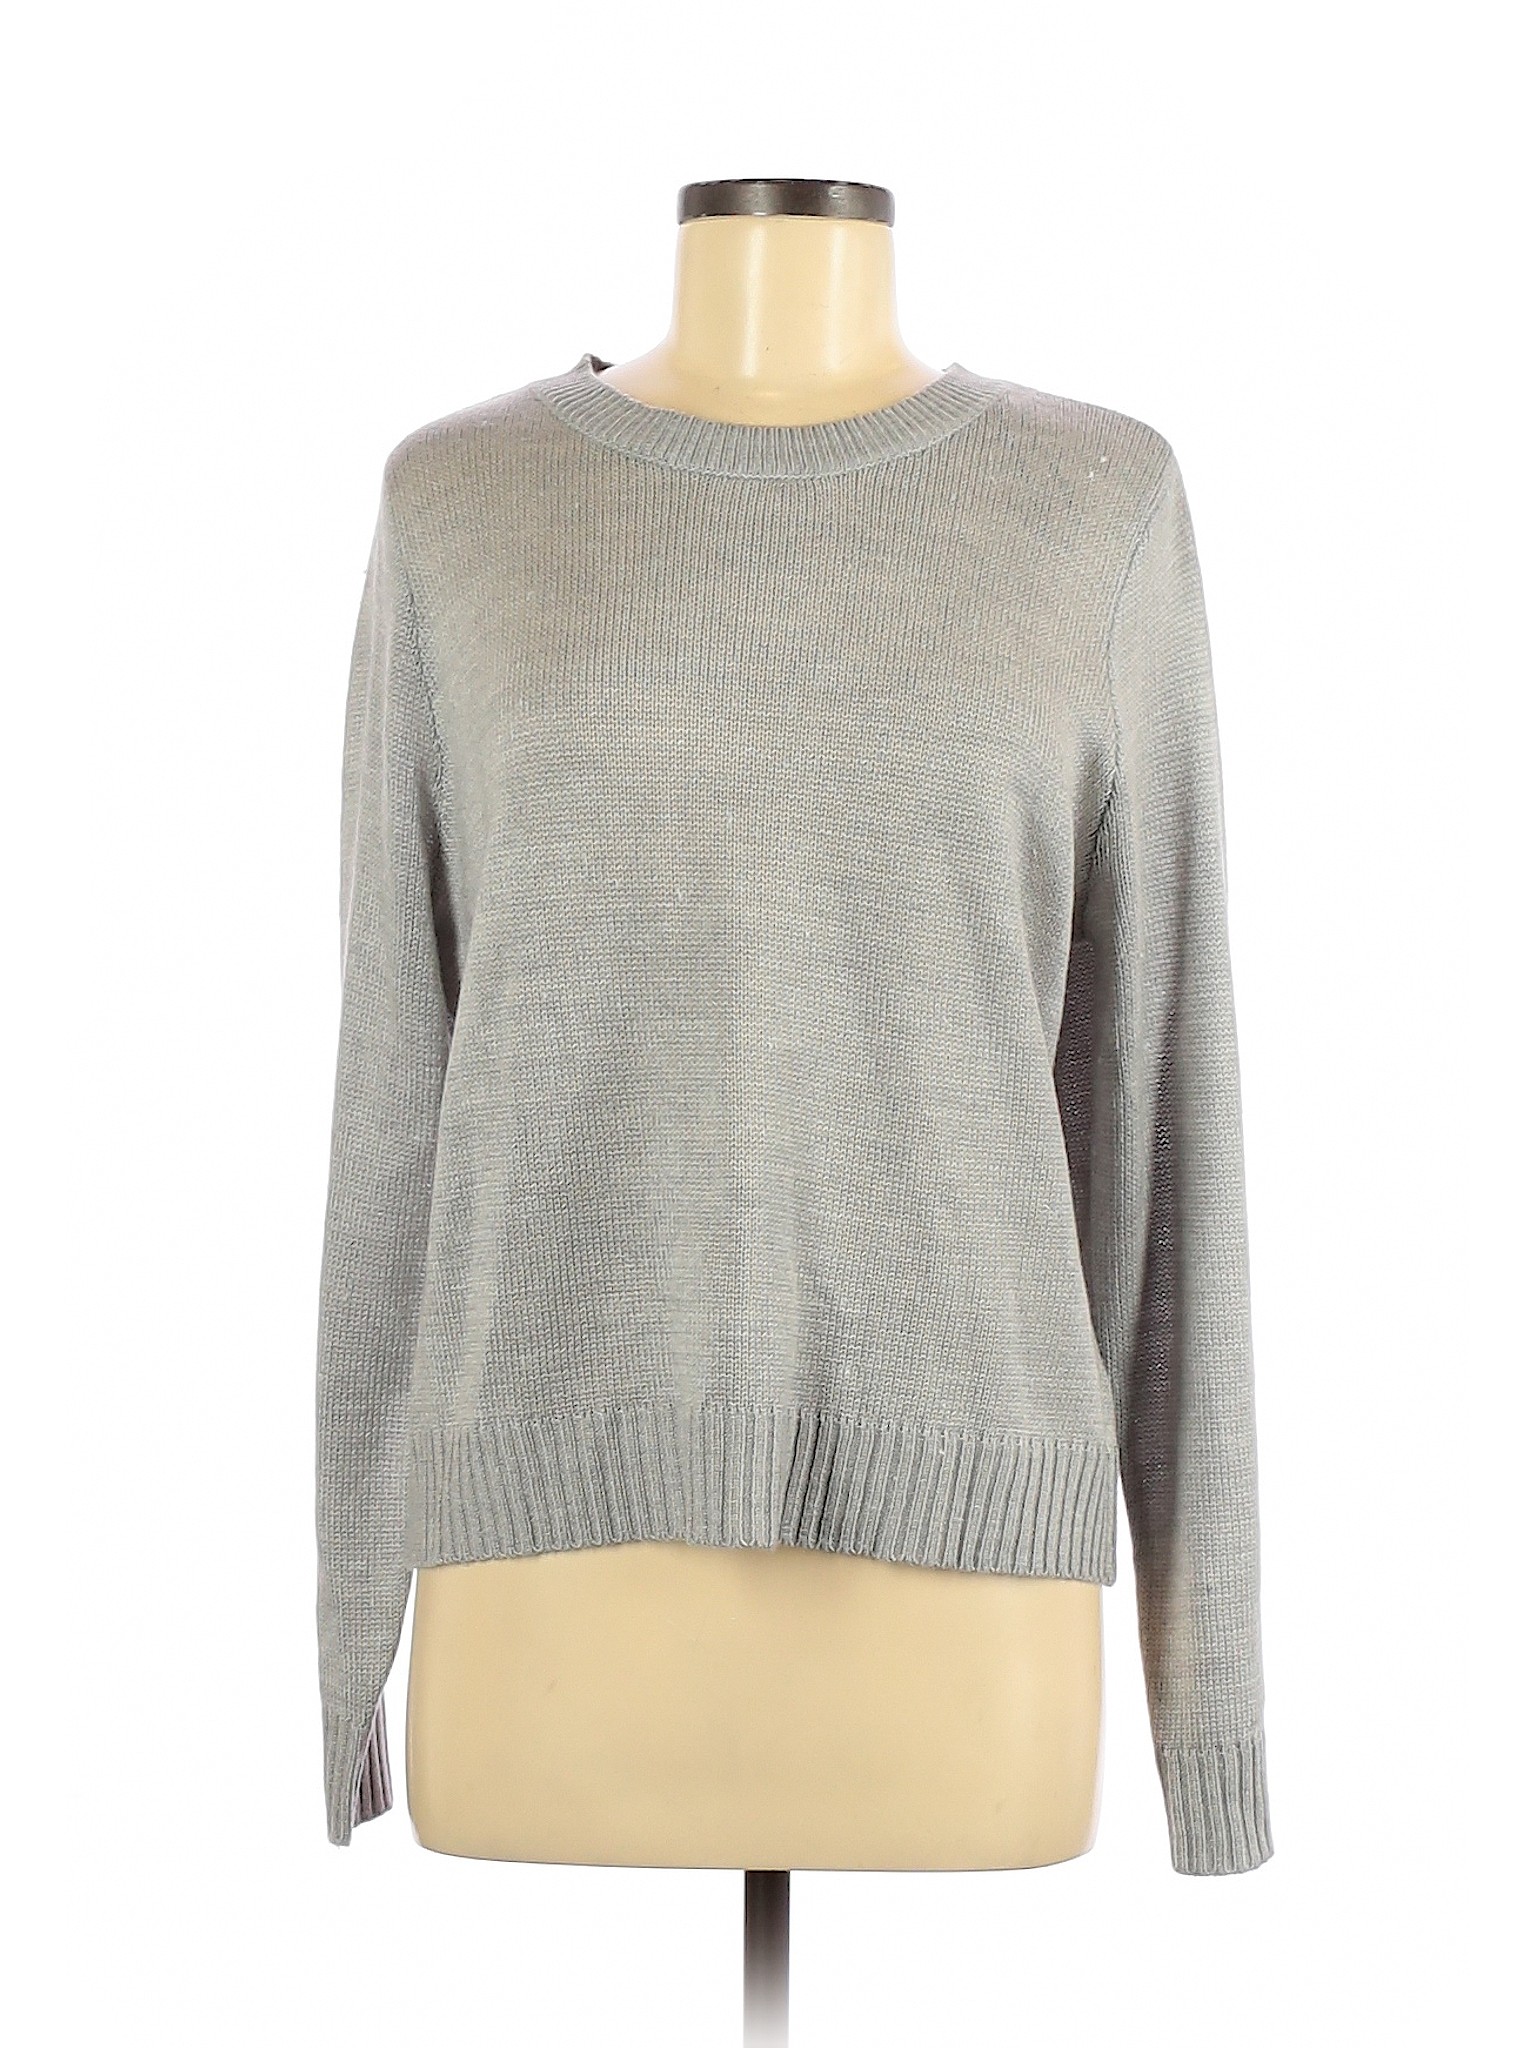 Divided by H&M Women Gray Pullover Sweater M | eBay